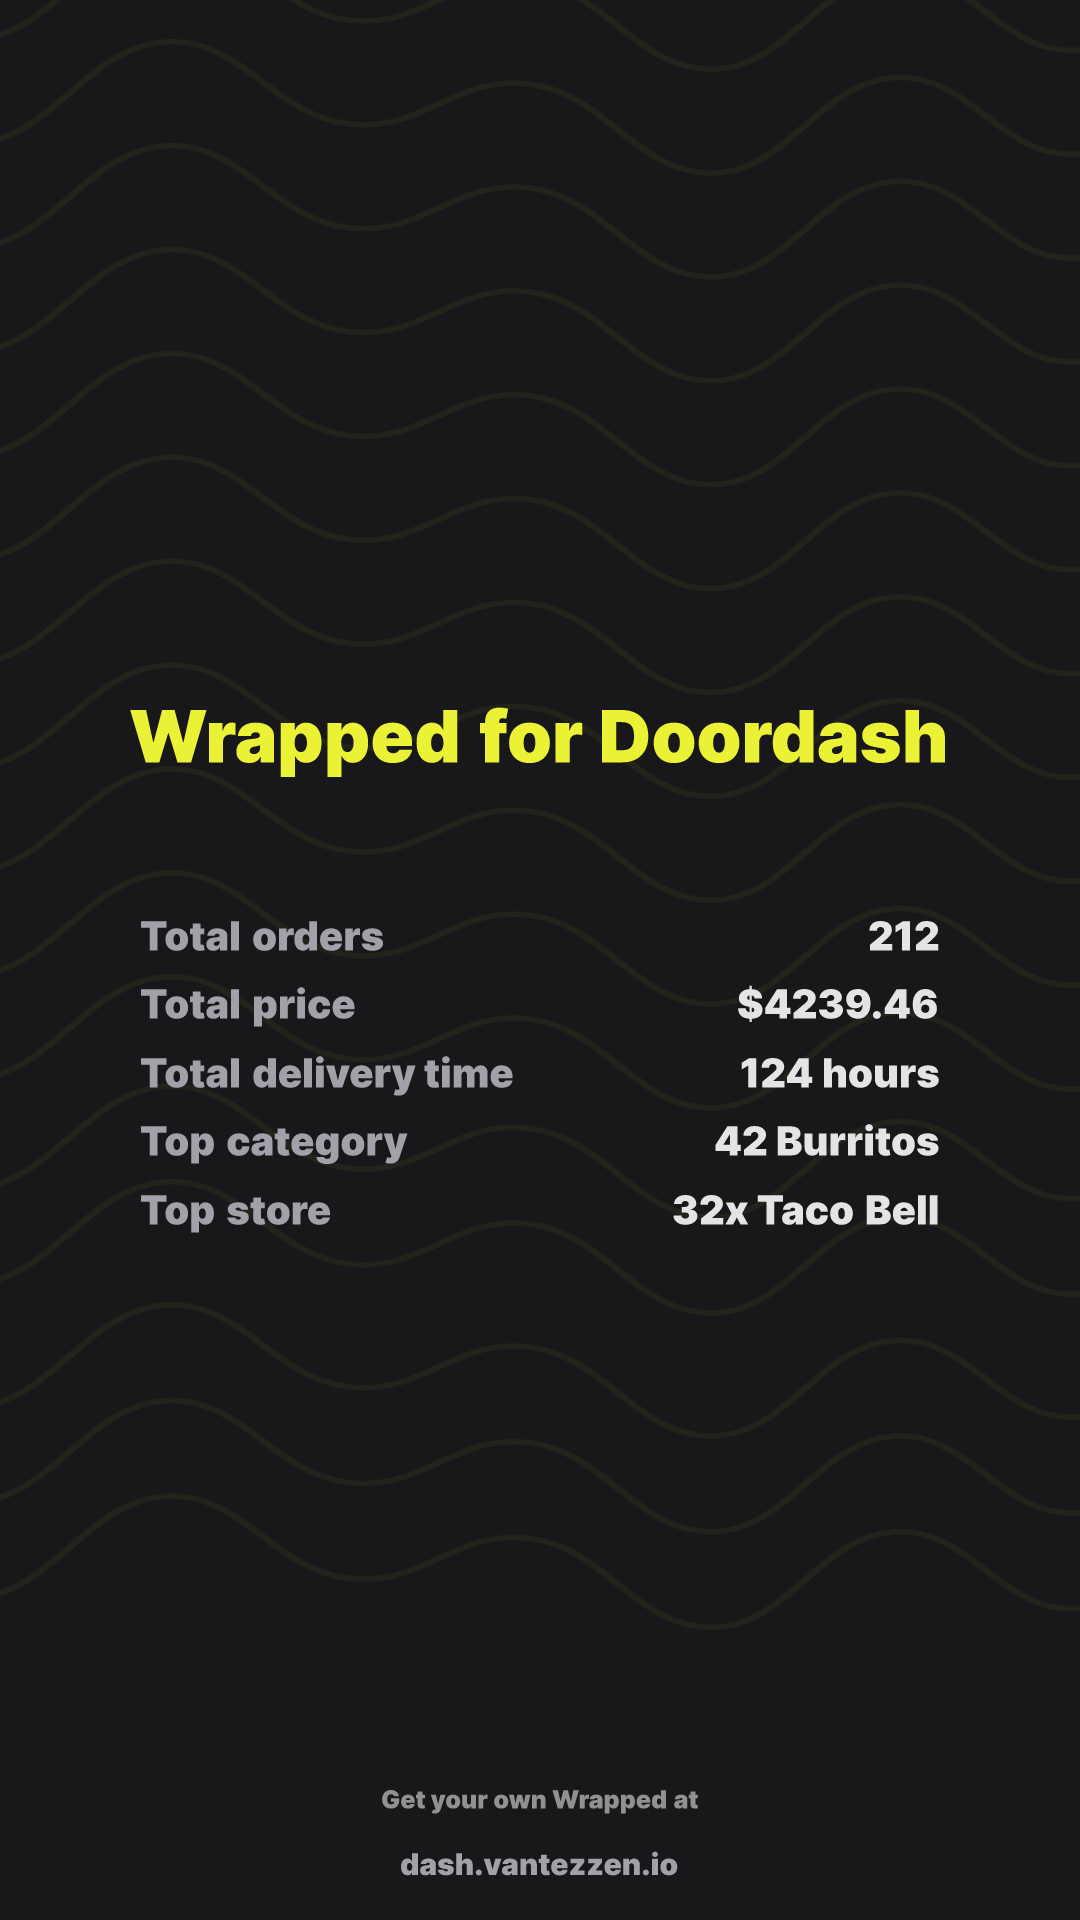 Wrapped for Doordash